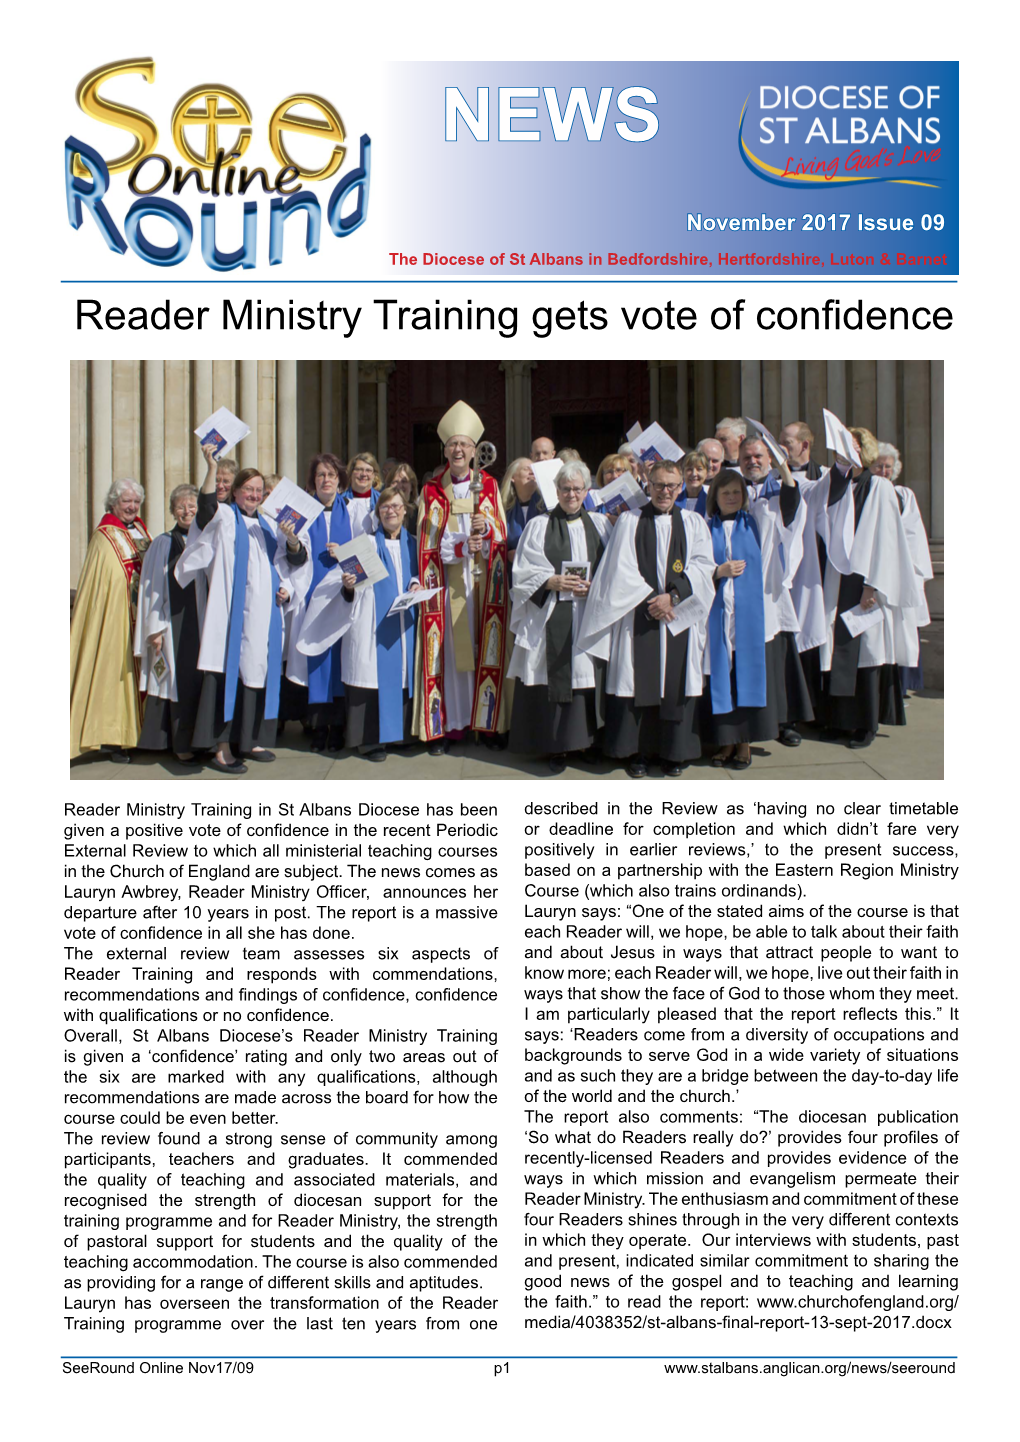 Reader Ministry Training Gets Vote of Confidence